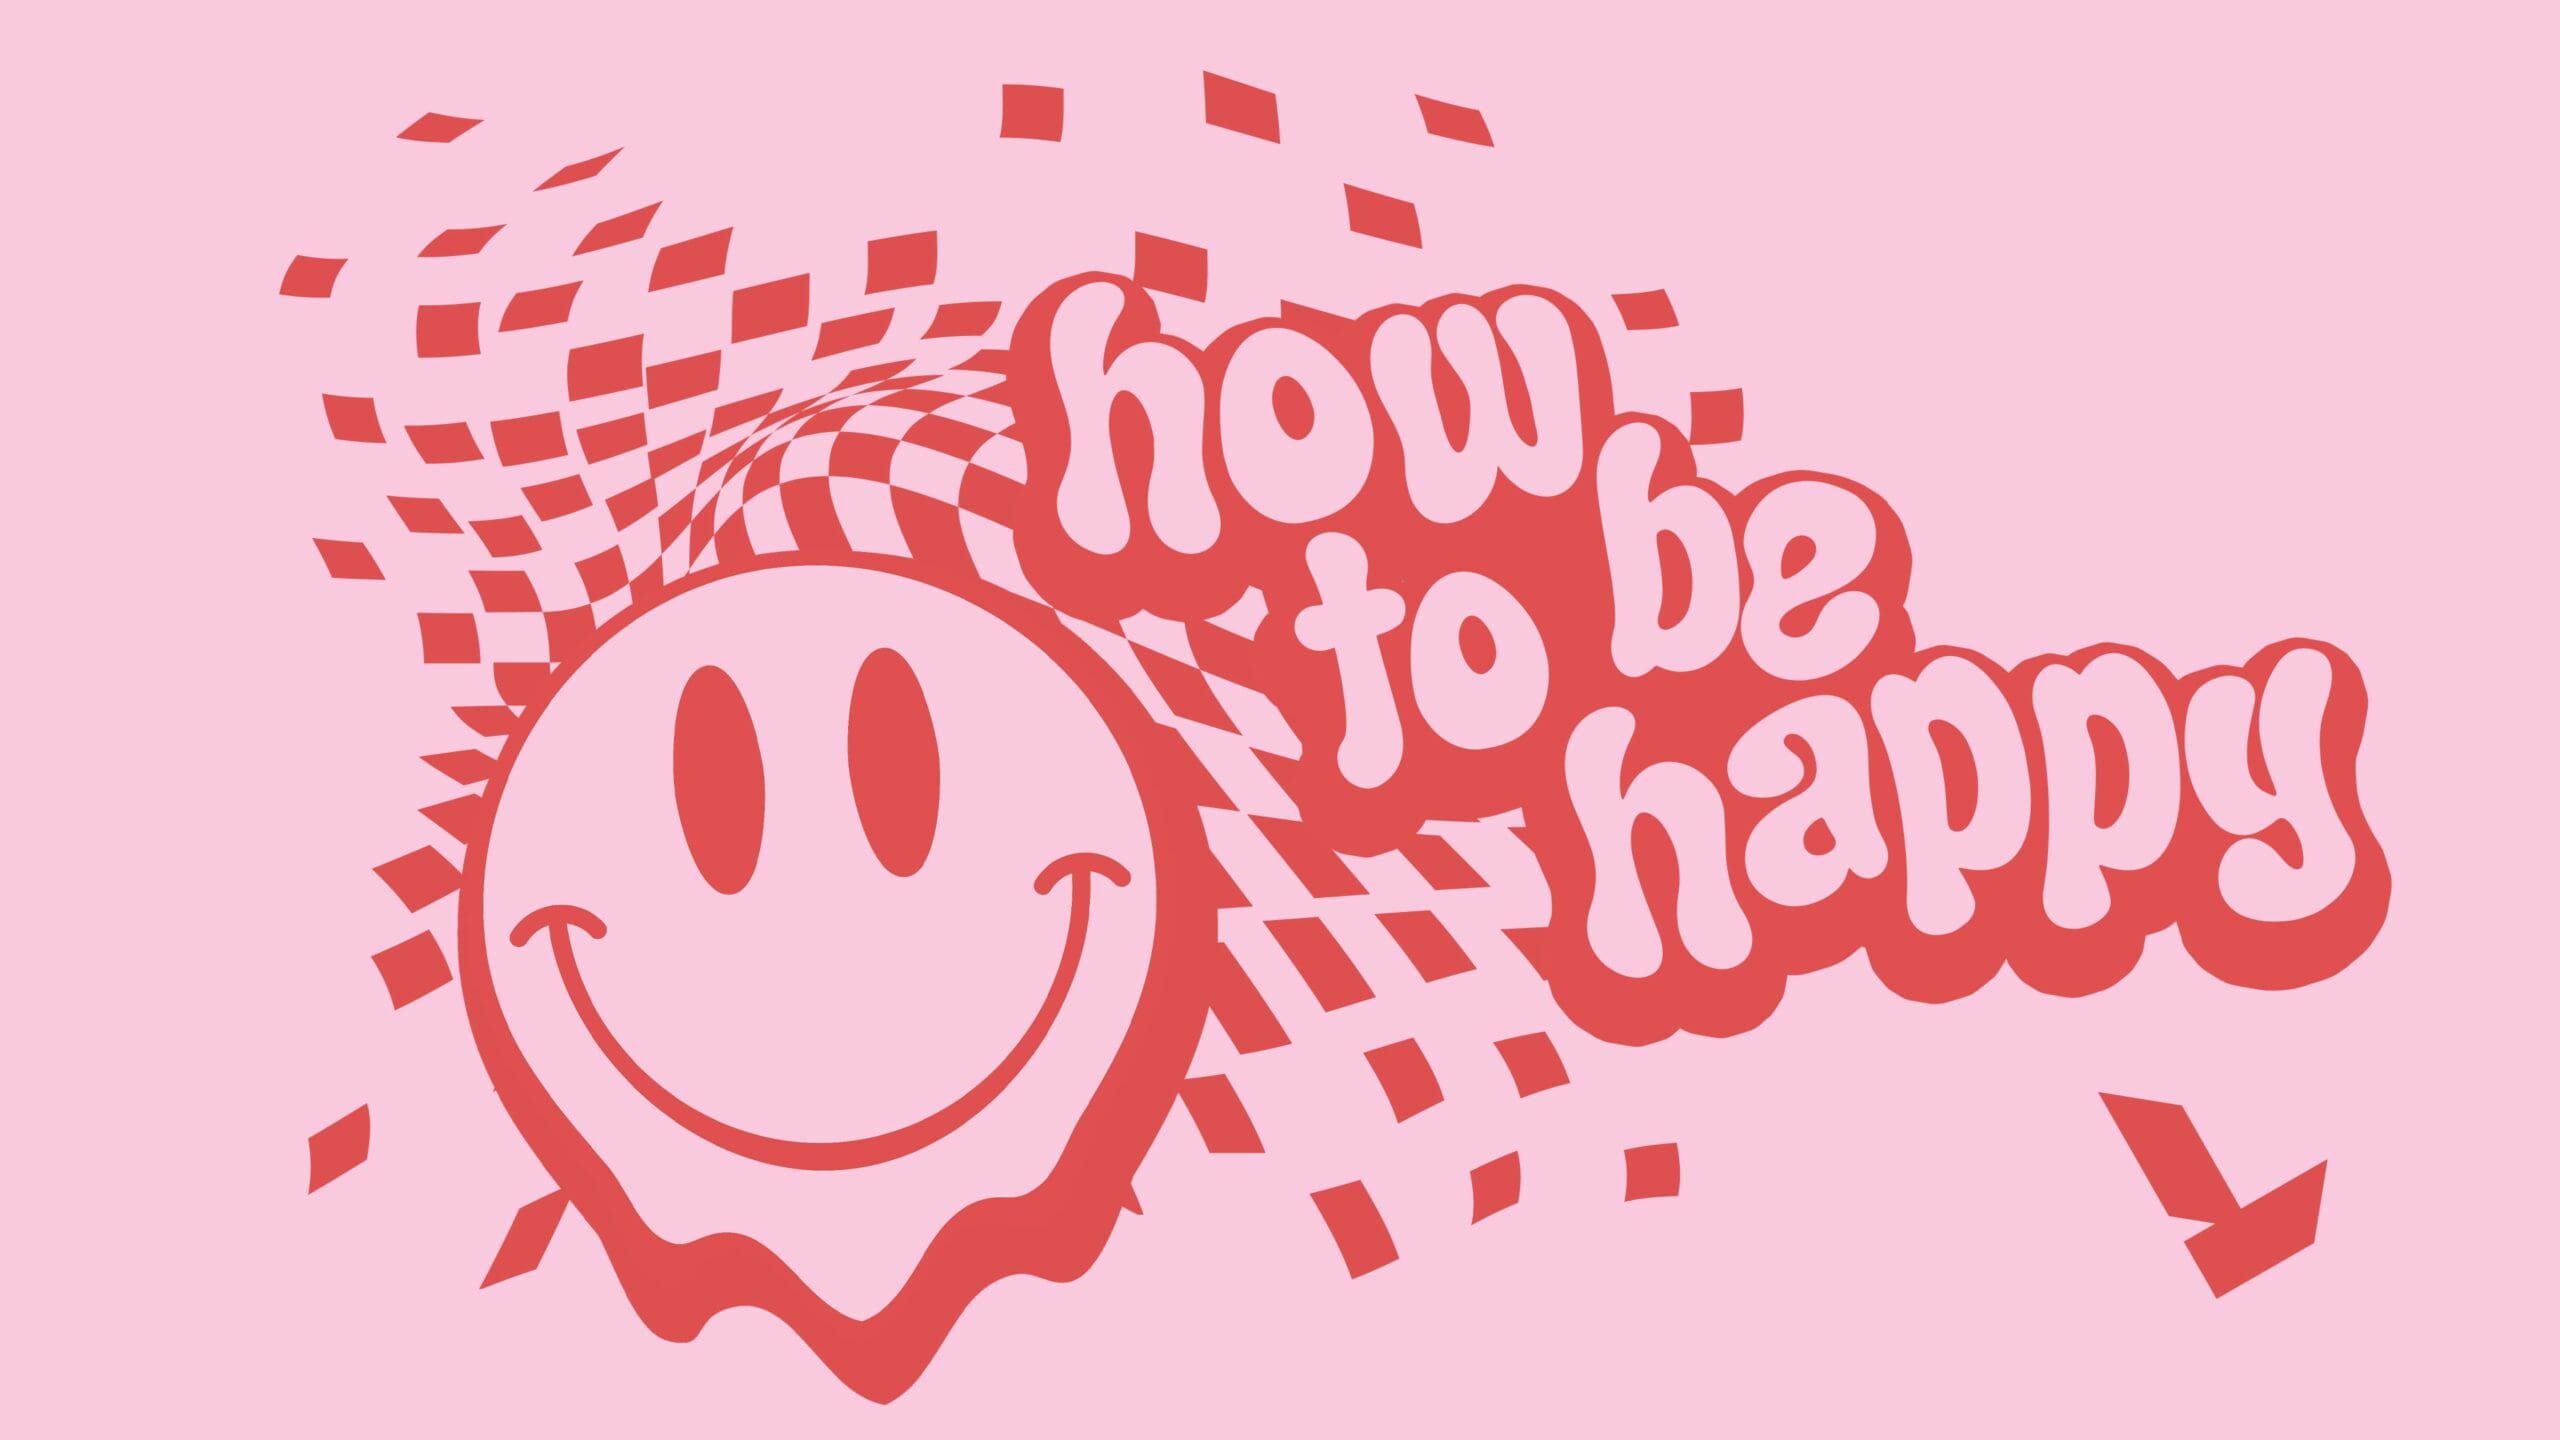 Sermon series graphic for How to be Happy.